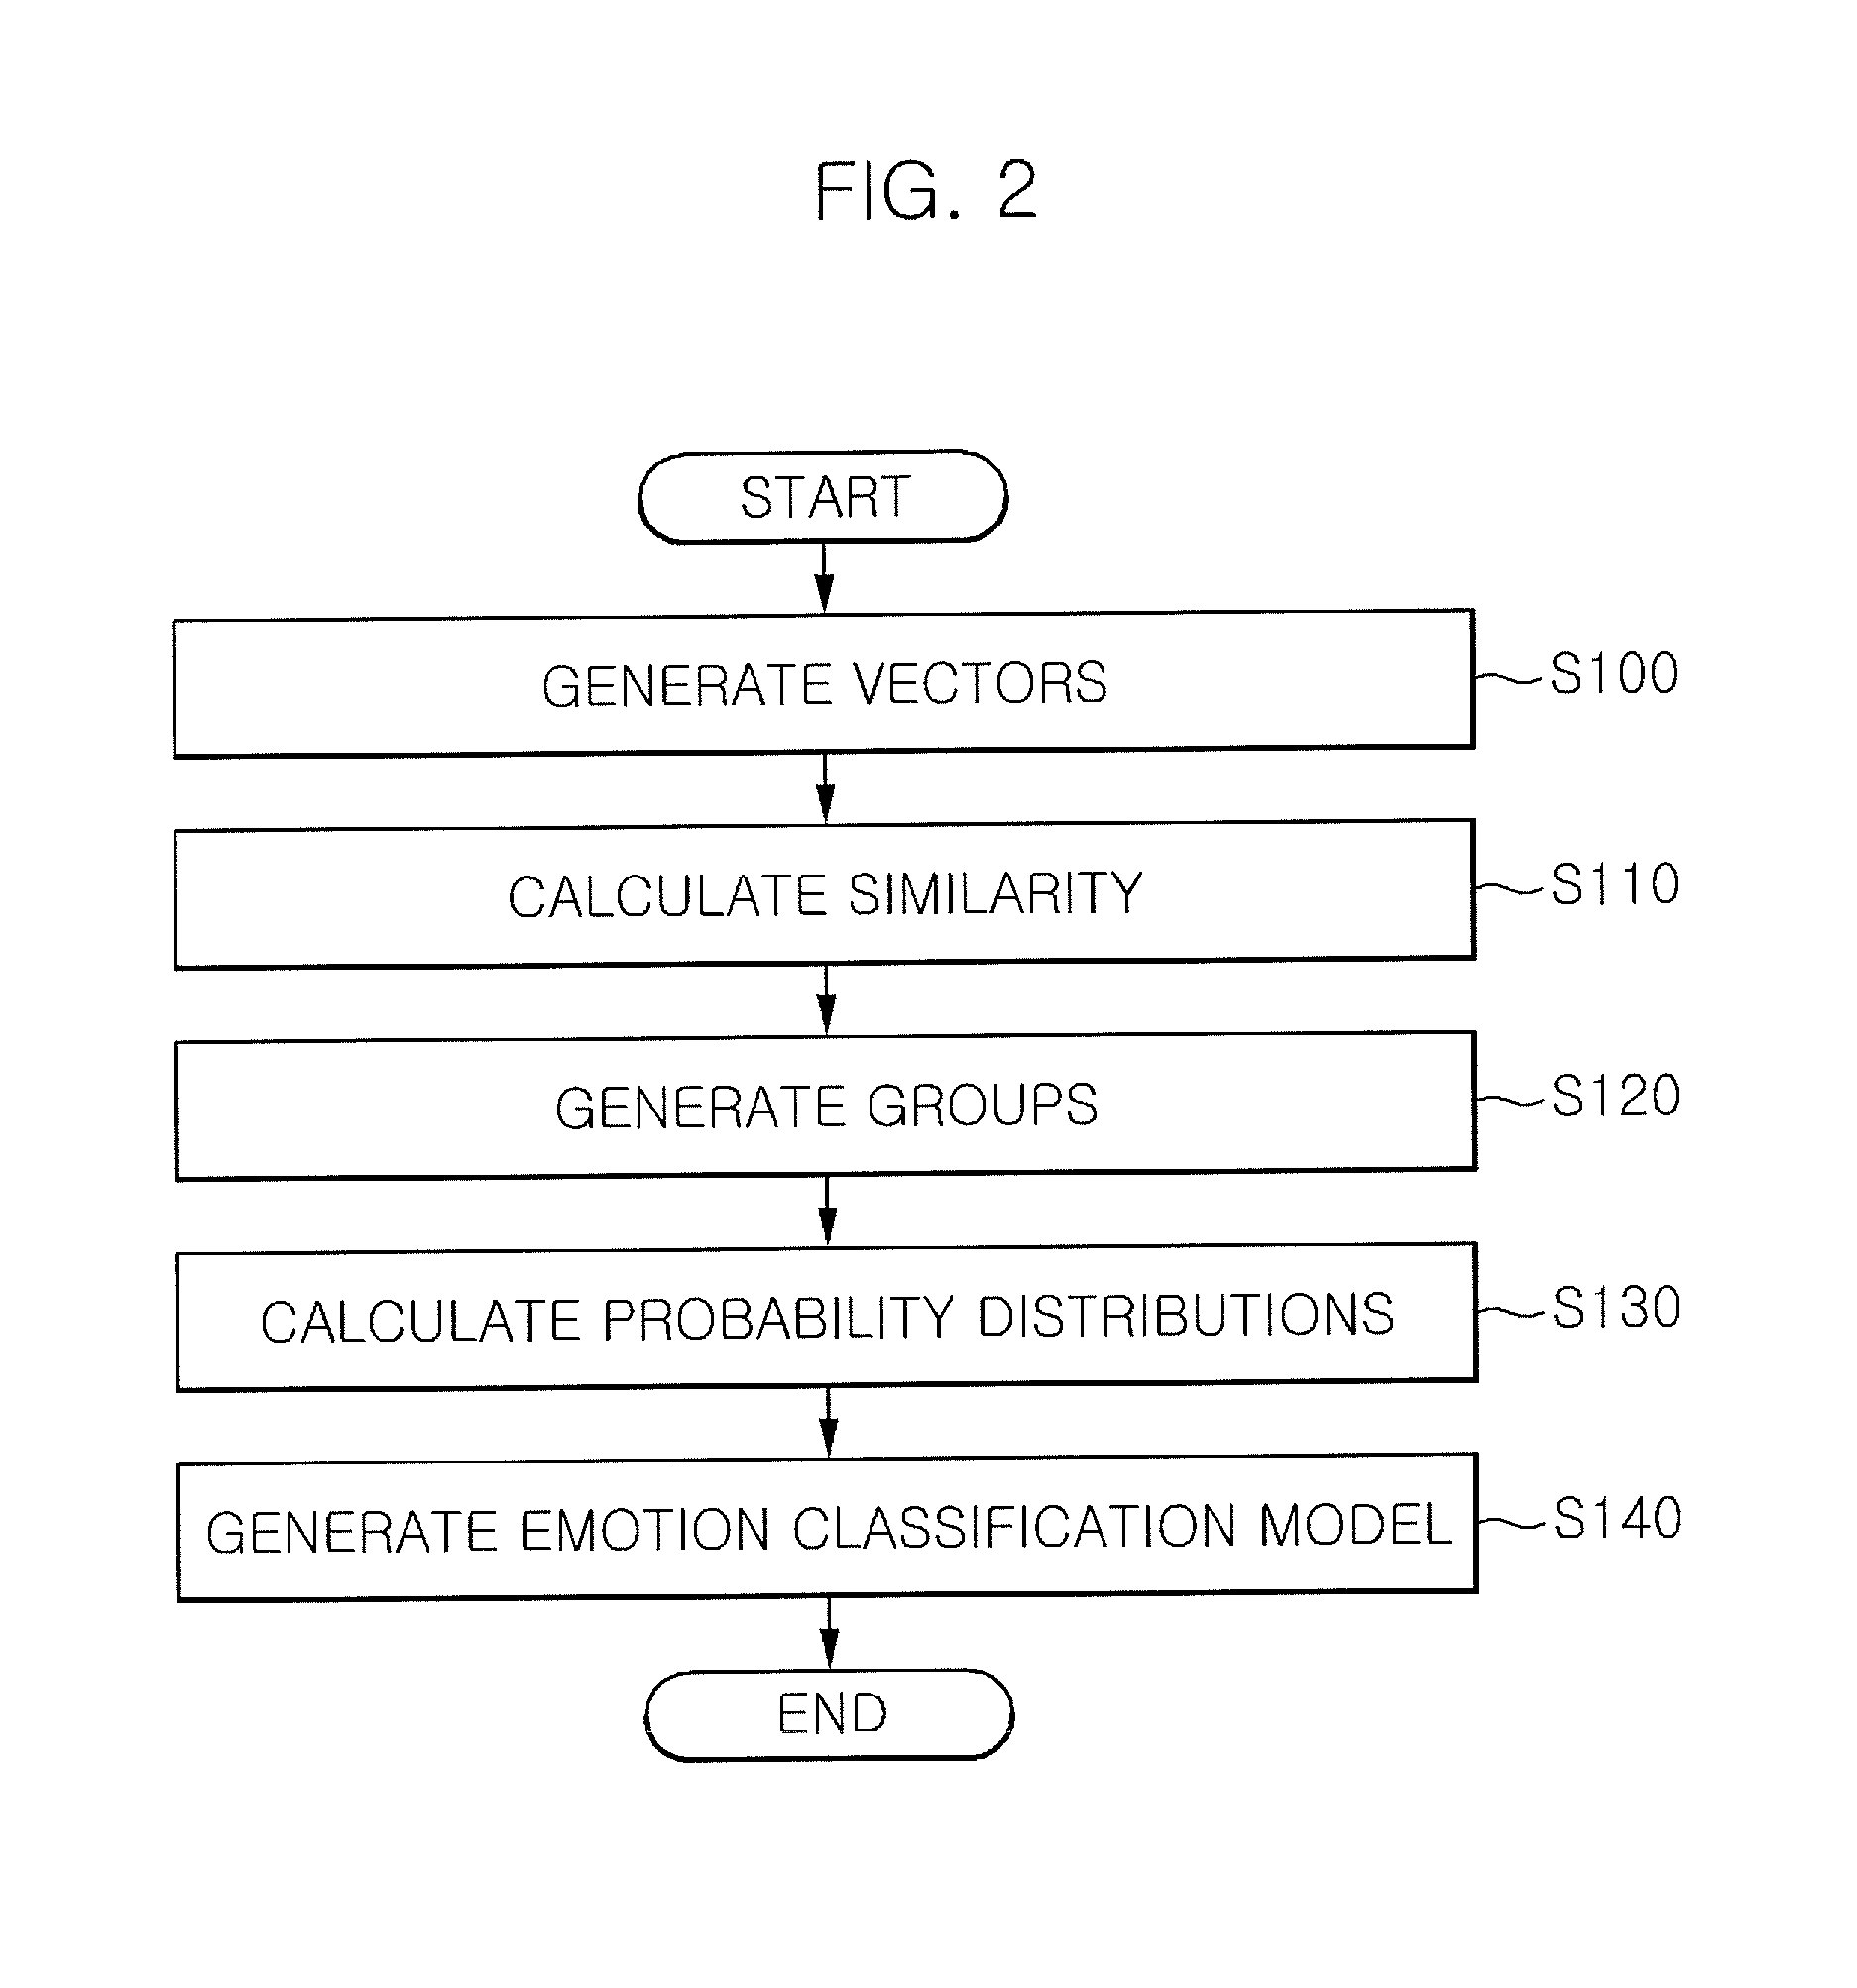 Music search apparatus and method using emotion model